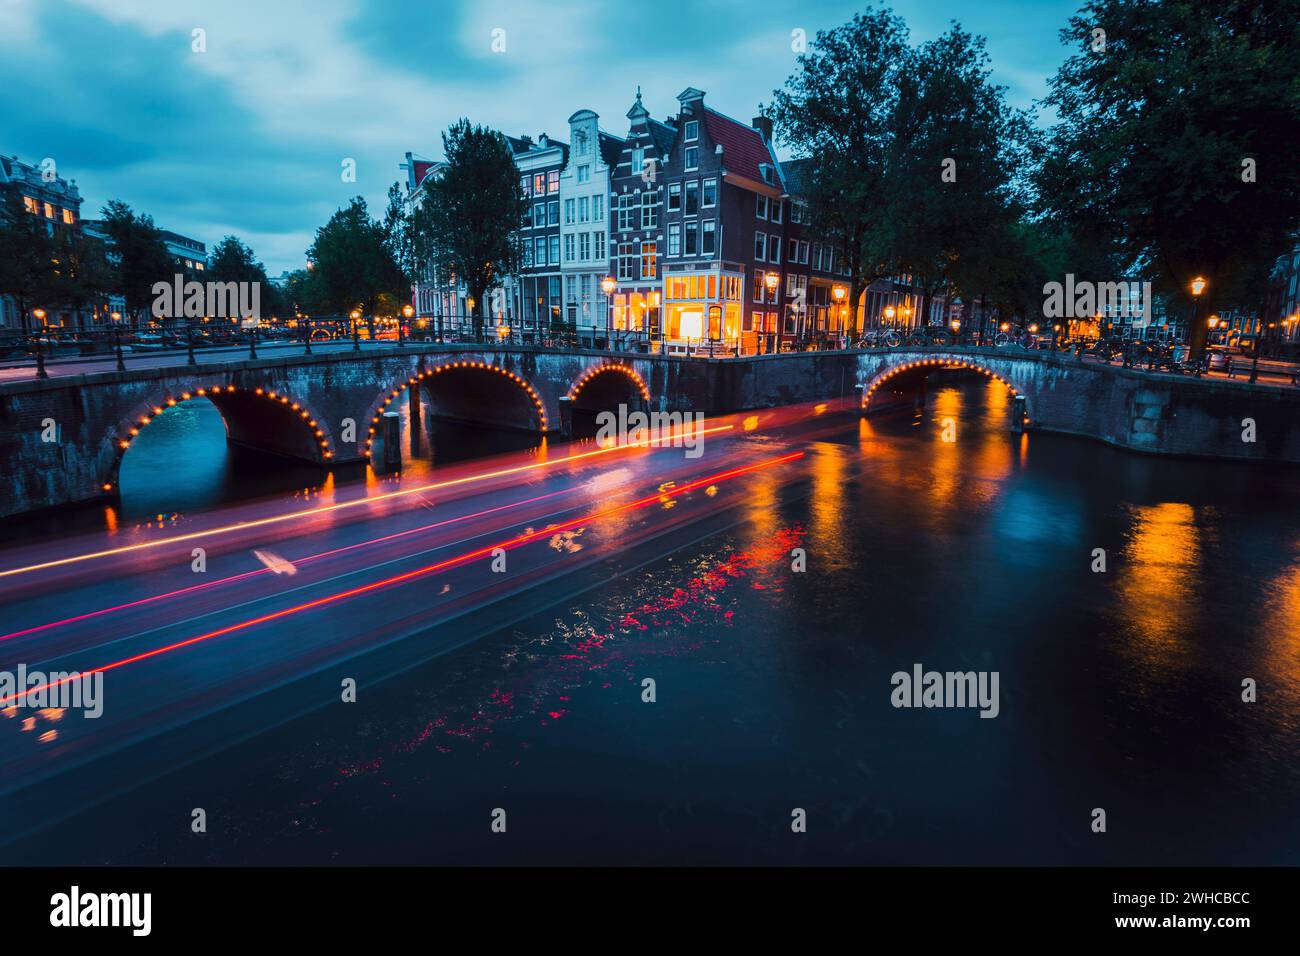 Amazing Light trails and reflections on water at the Leidsegracht and Keizersgracht canals in Amsterdam at evening. Long exposure shot. romantic city trip concept. Stock Photo